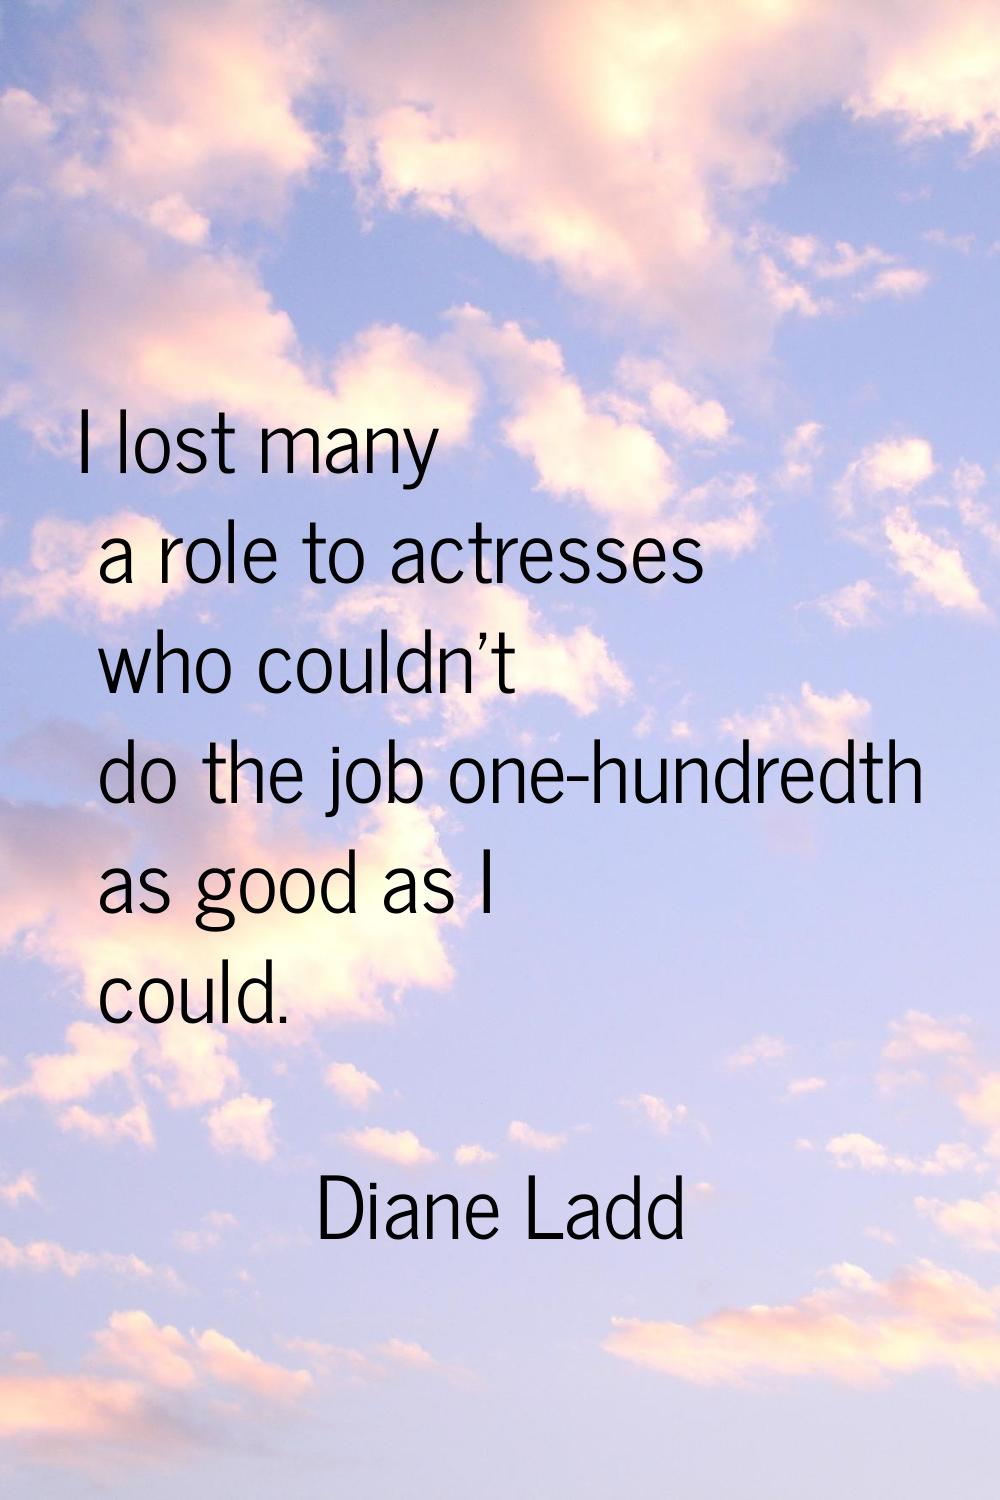 I lost many a role to actresses who couldn't do the job one-hundredth as good as I could.